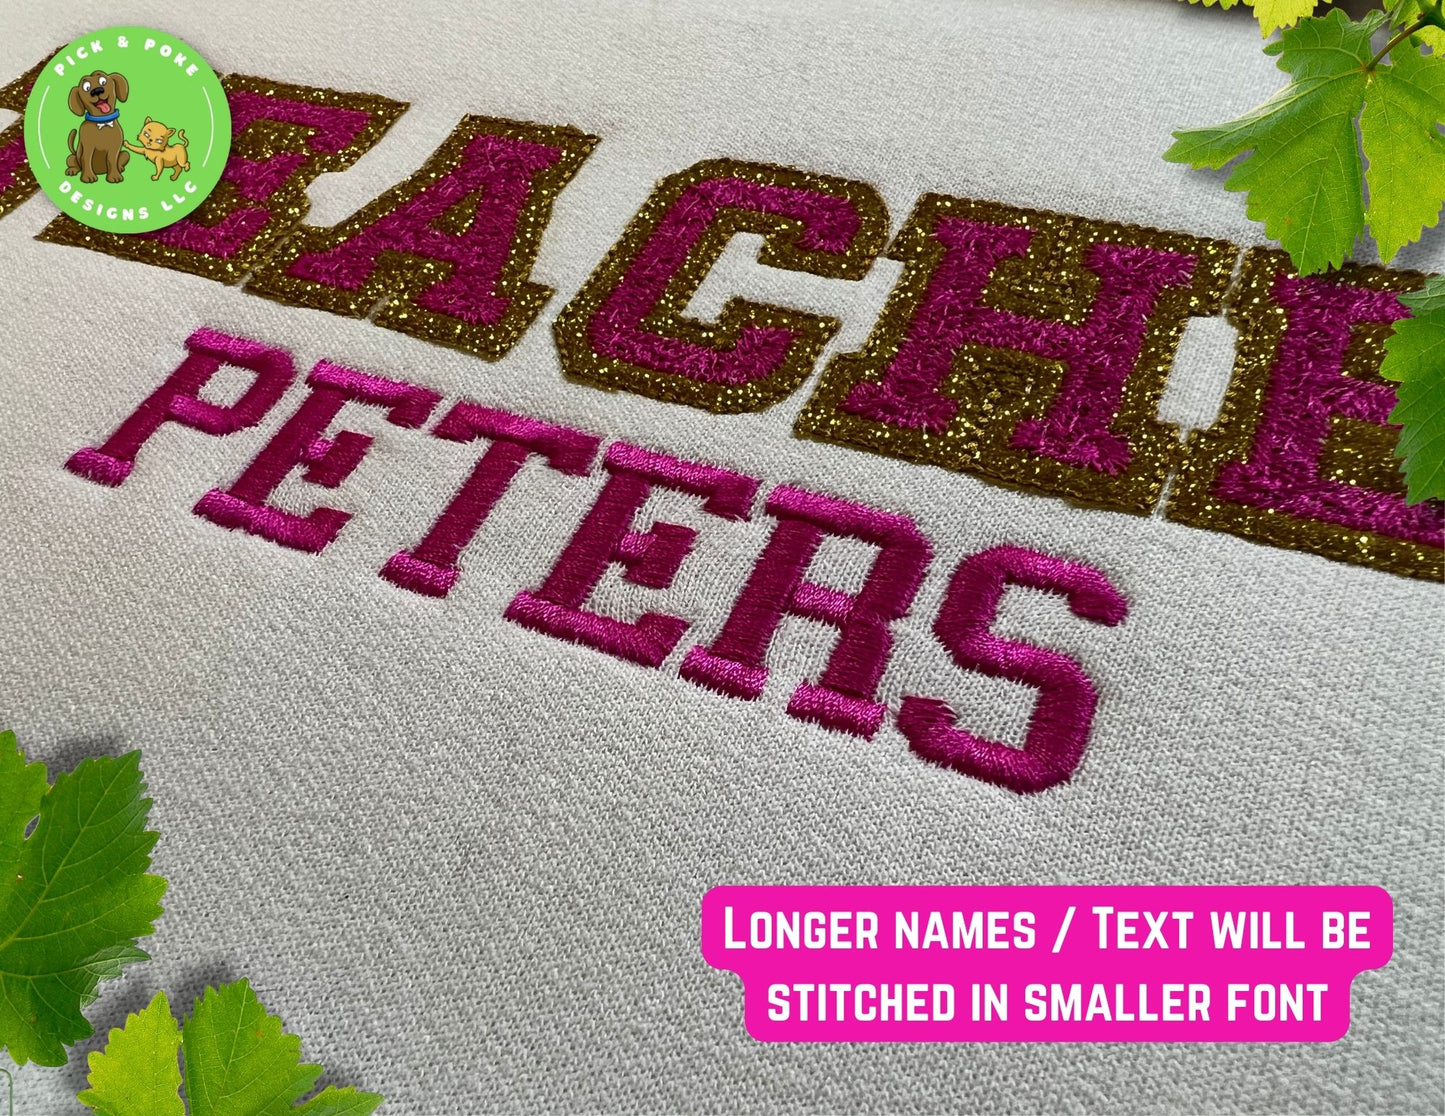 Longer names and text will be stitched using a smaller font size. 